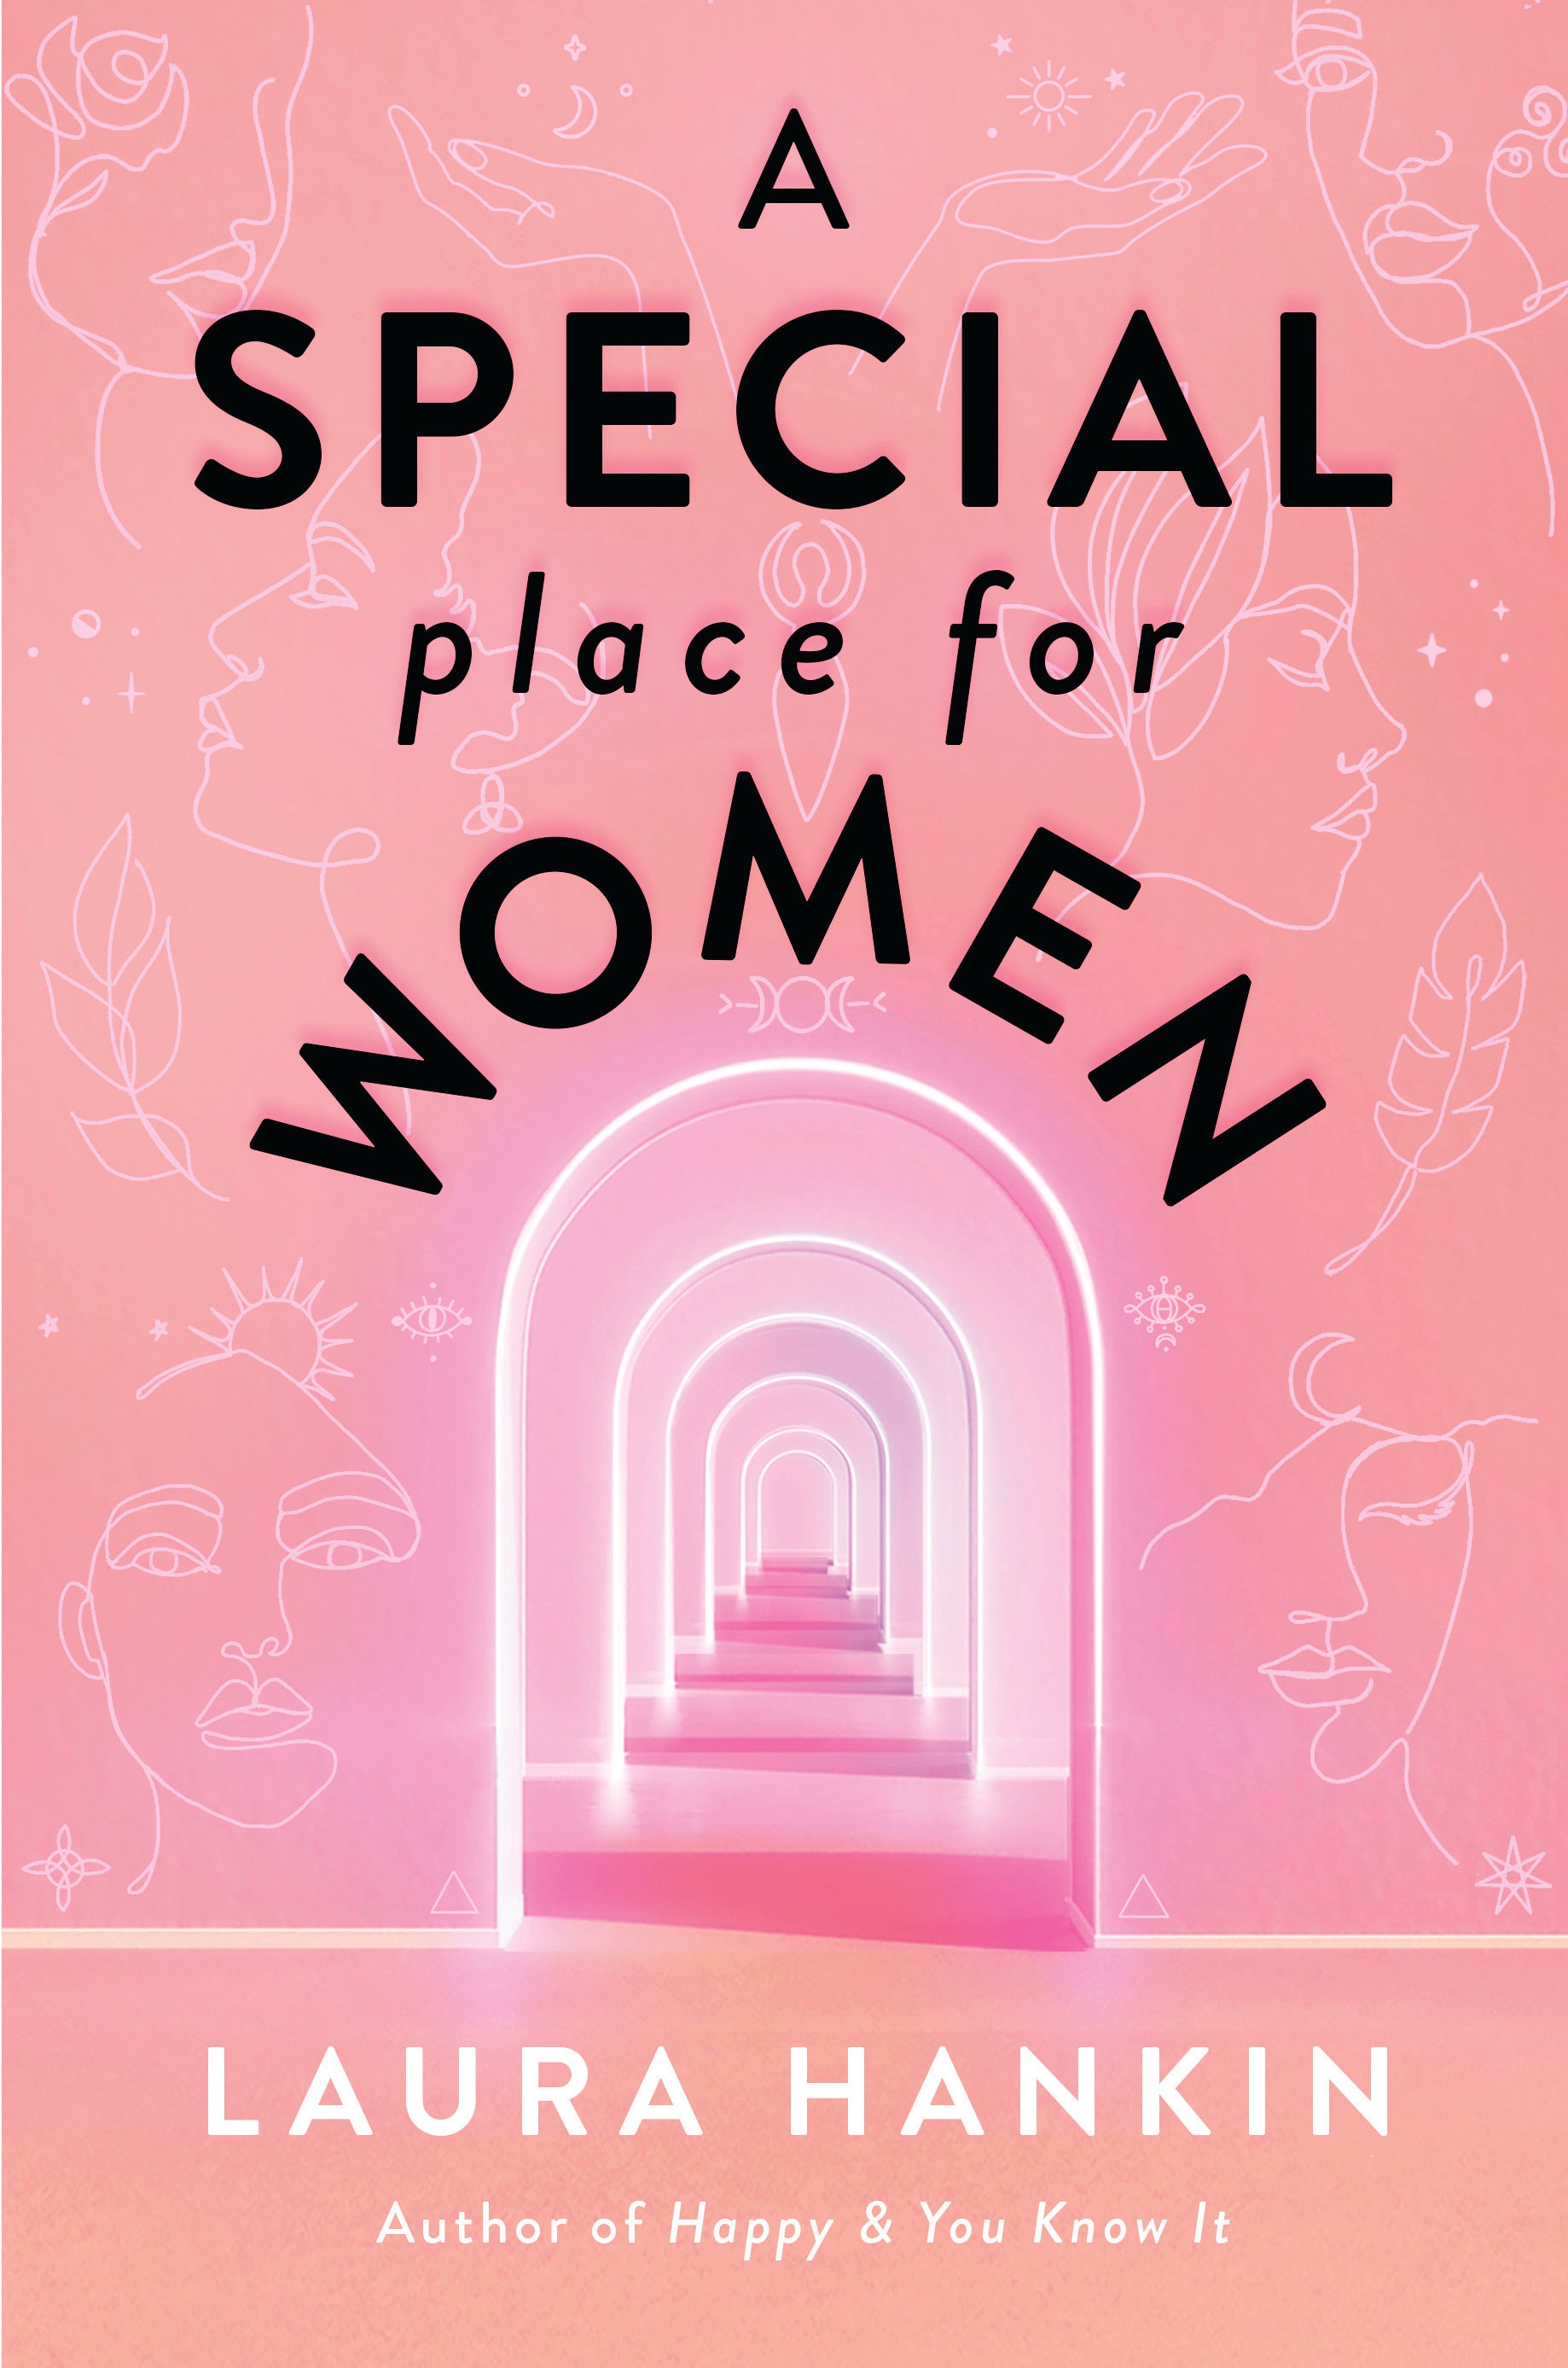 Book Review - A Special Place for Women